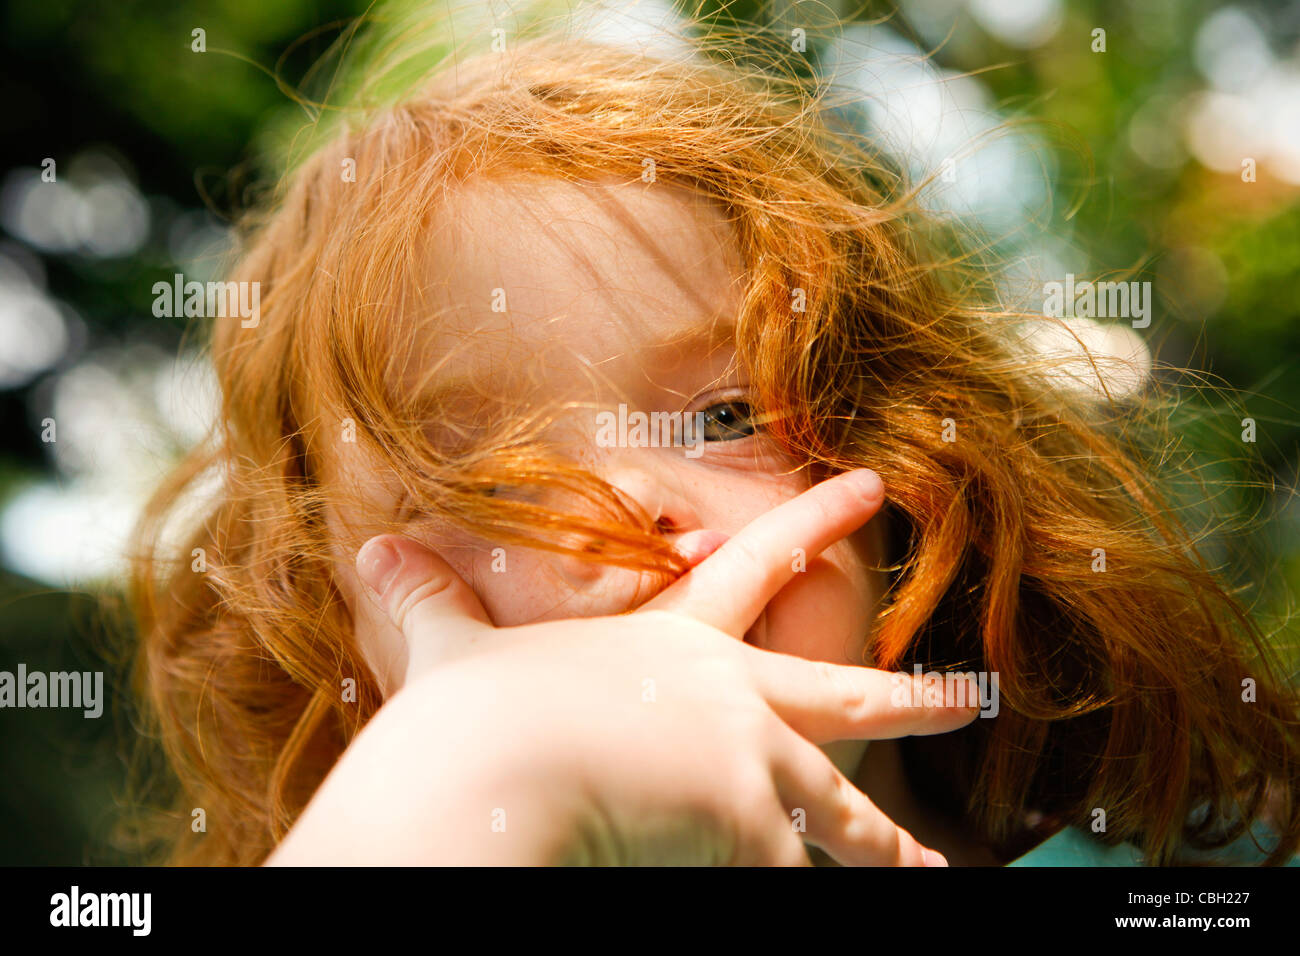 Little girl, aged 5, with her hand covering her mouth in a garden. Summer. Stock Photo